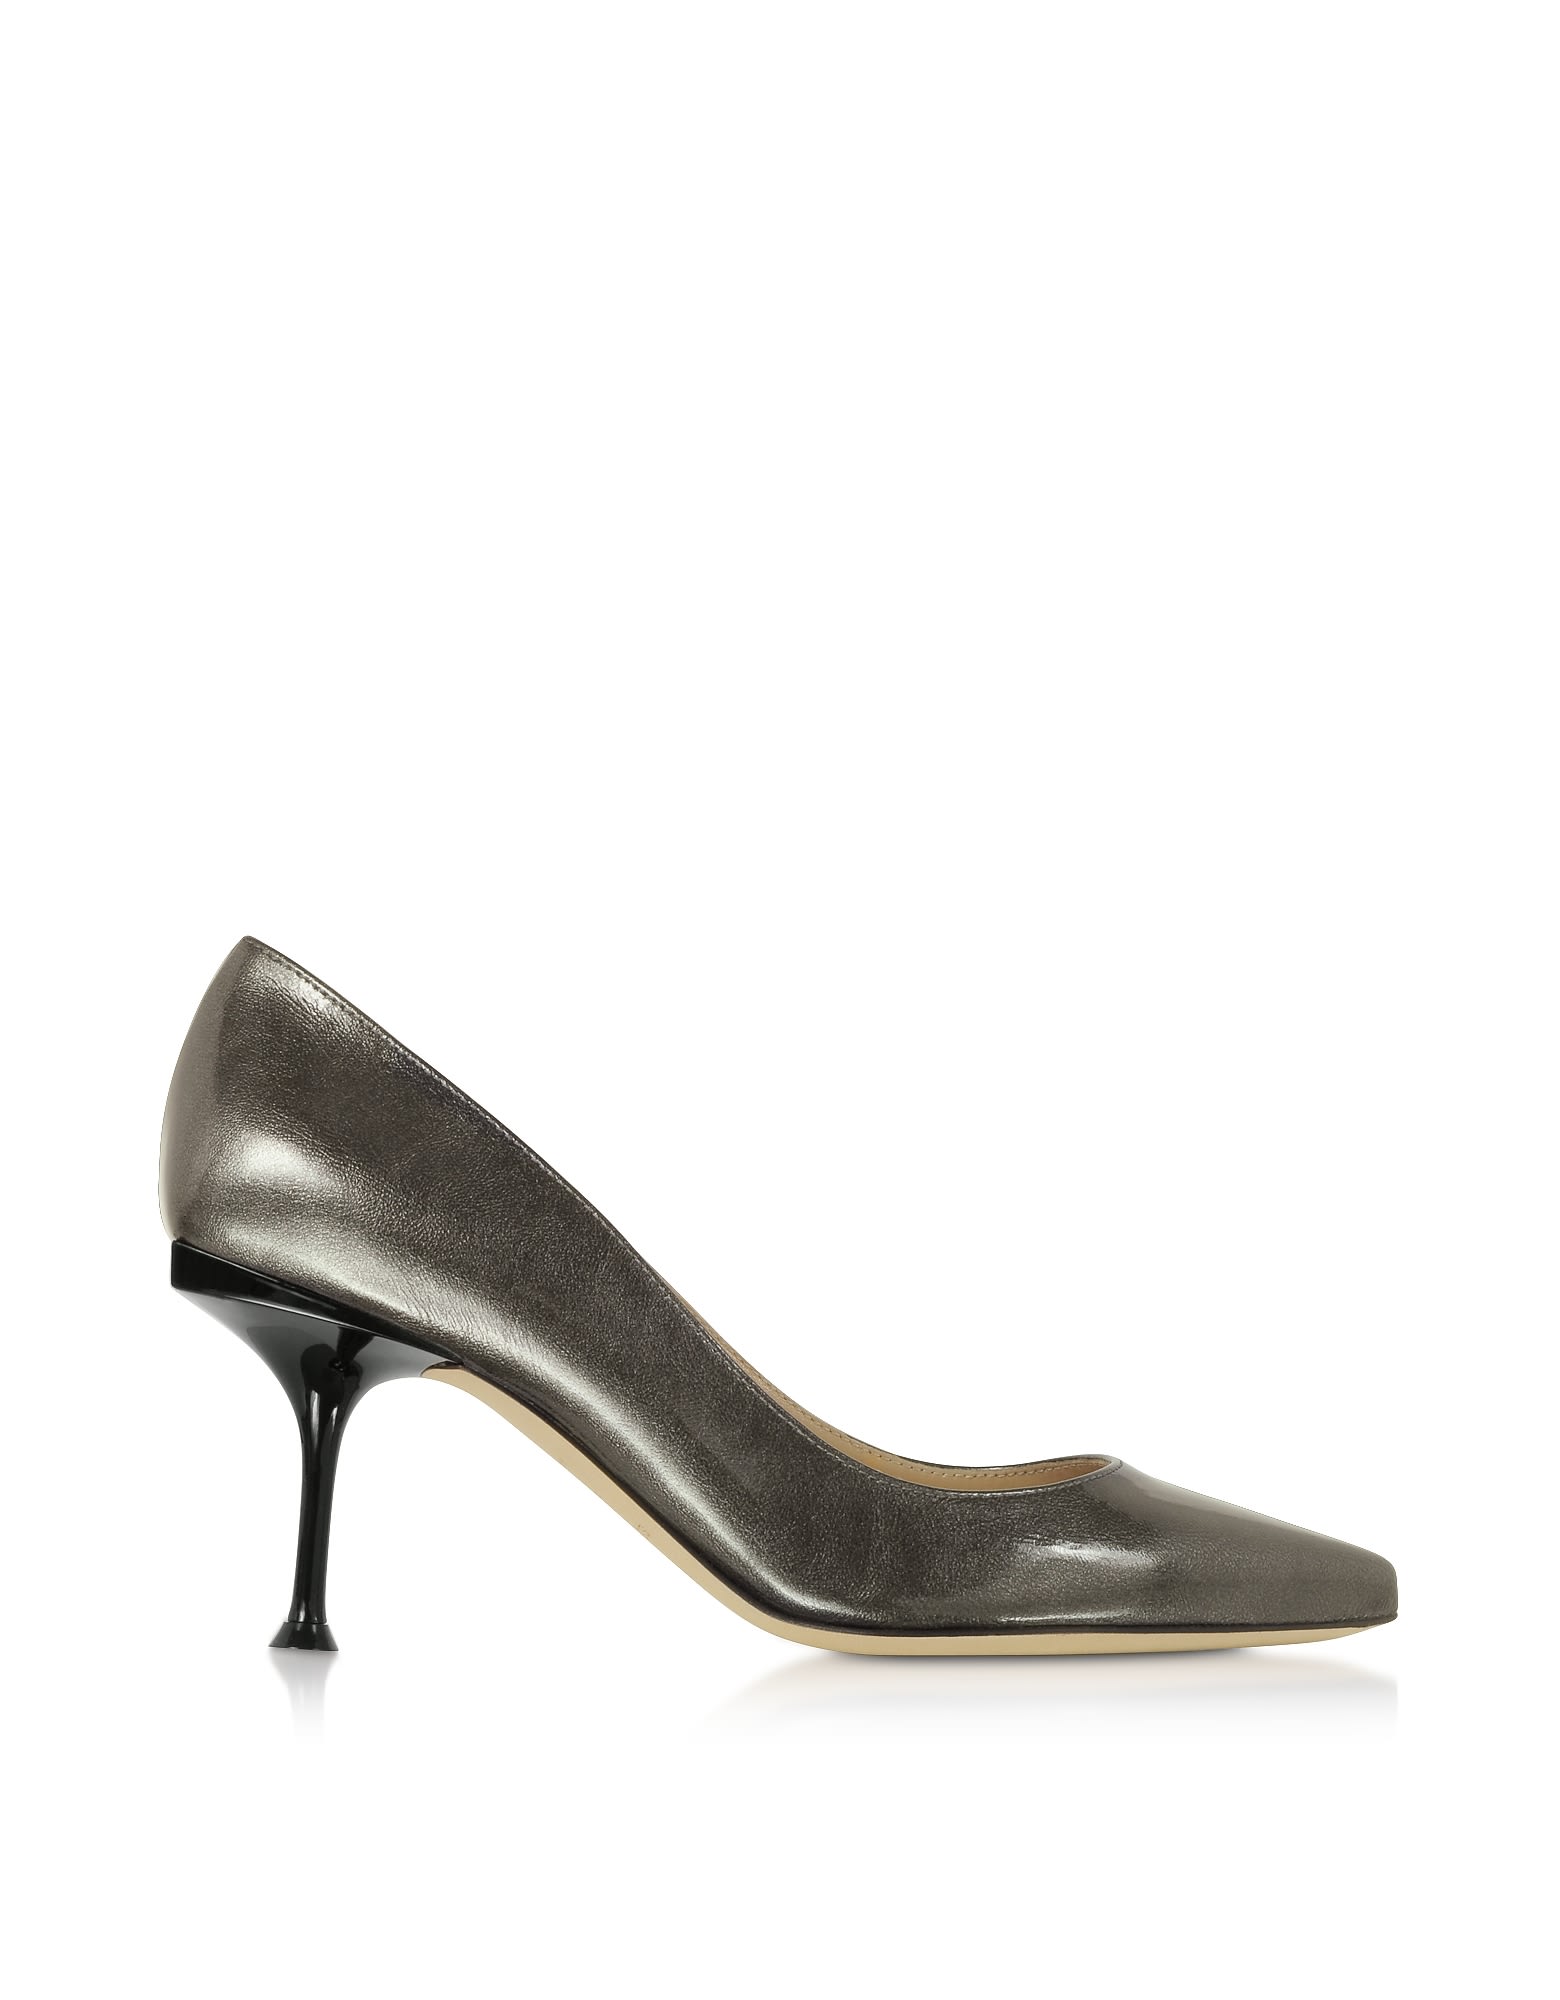 Sergio Rossi Glacee Anthracite Metallic Leather Pumps